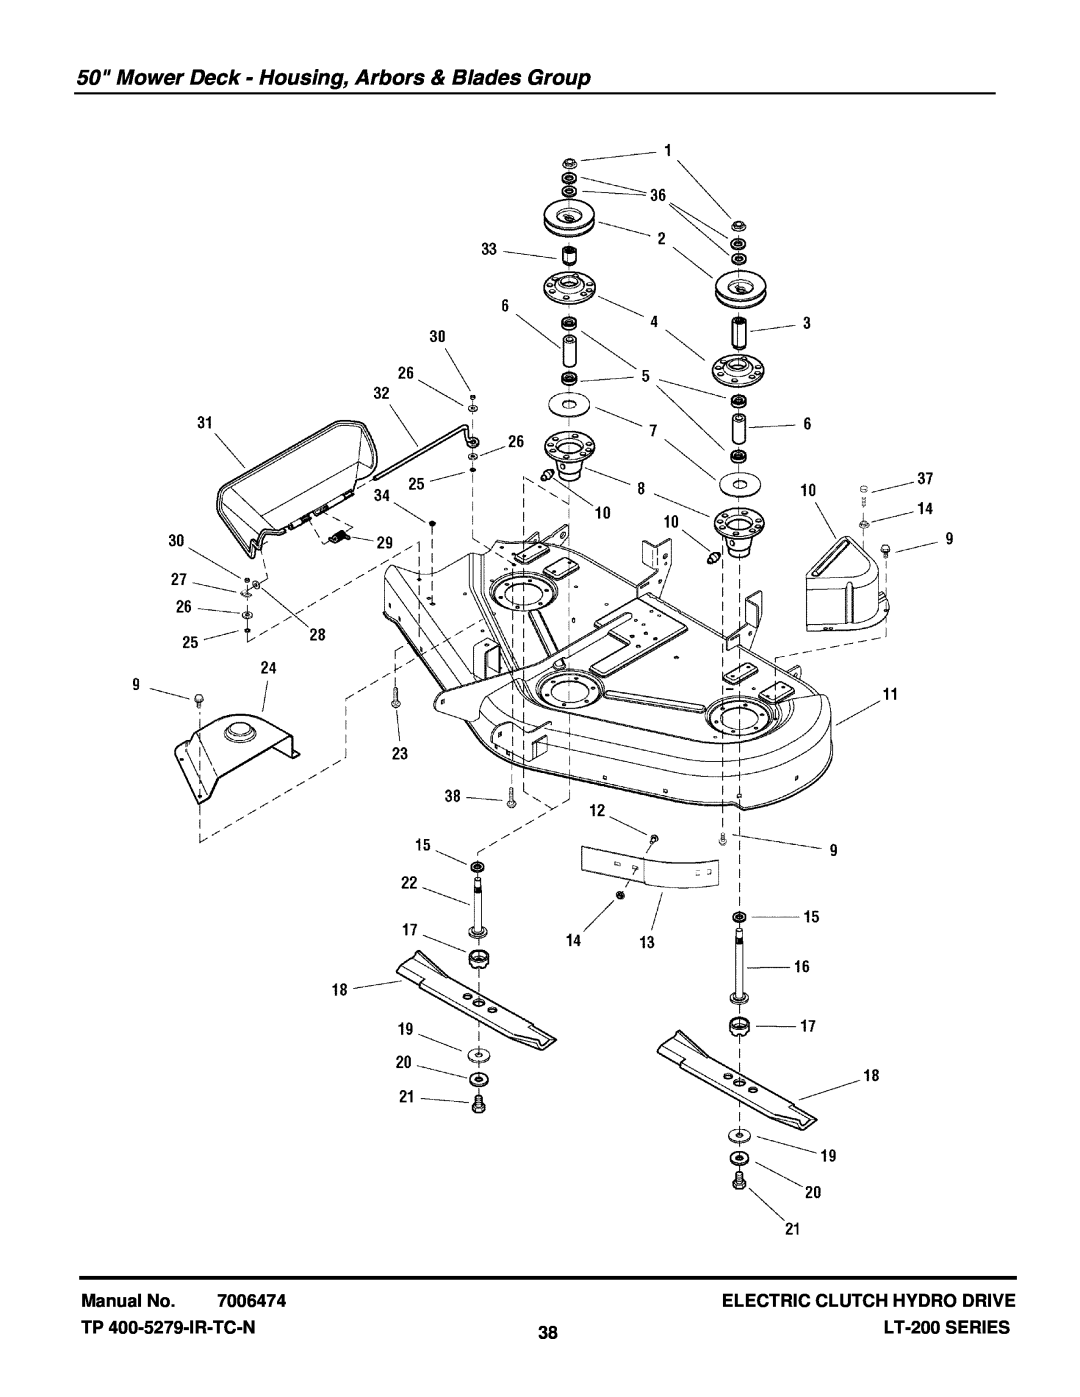 Snapper ELT18538 (2690593) Mower Deck - Housing, Arbors & Blades Group, Manual No, 7006474, Electric Clutch Hydro Drive 